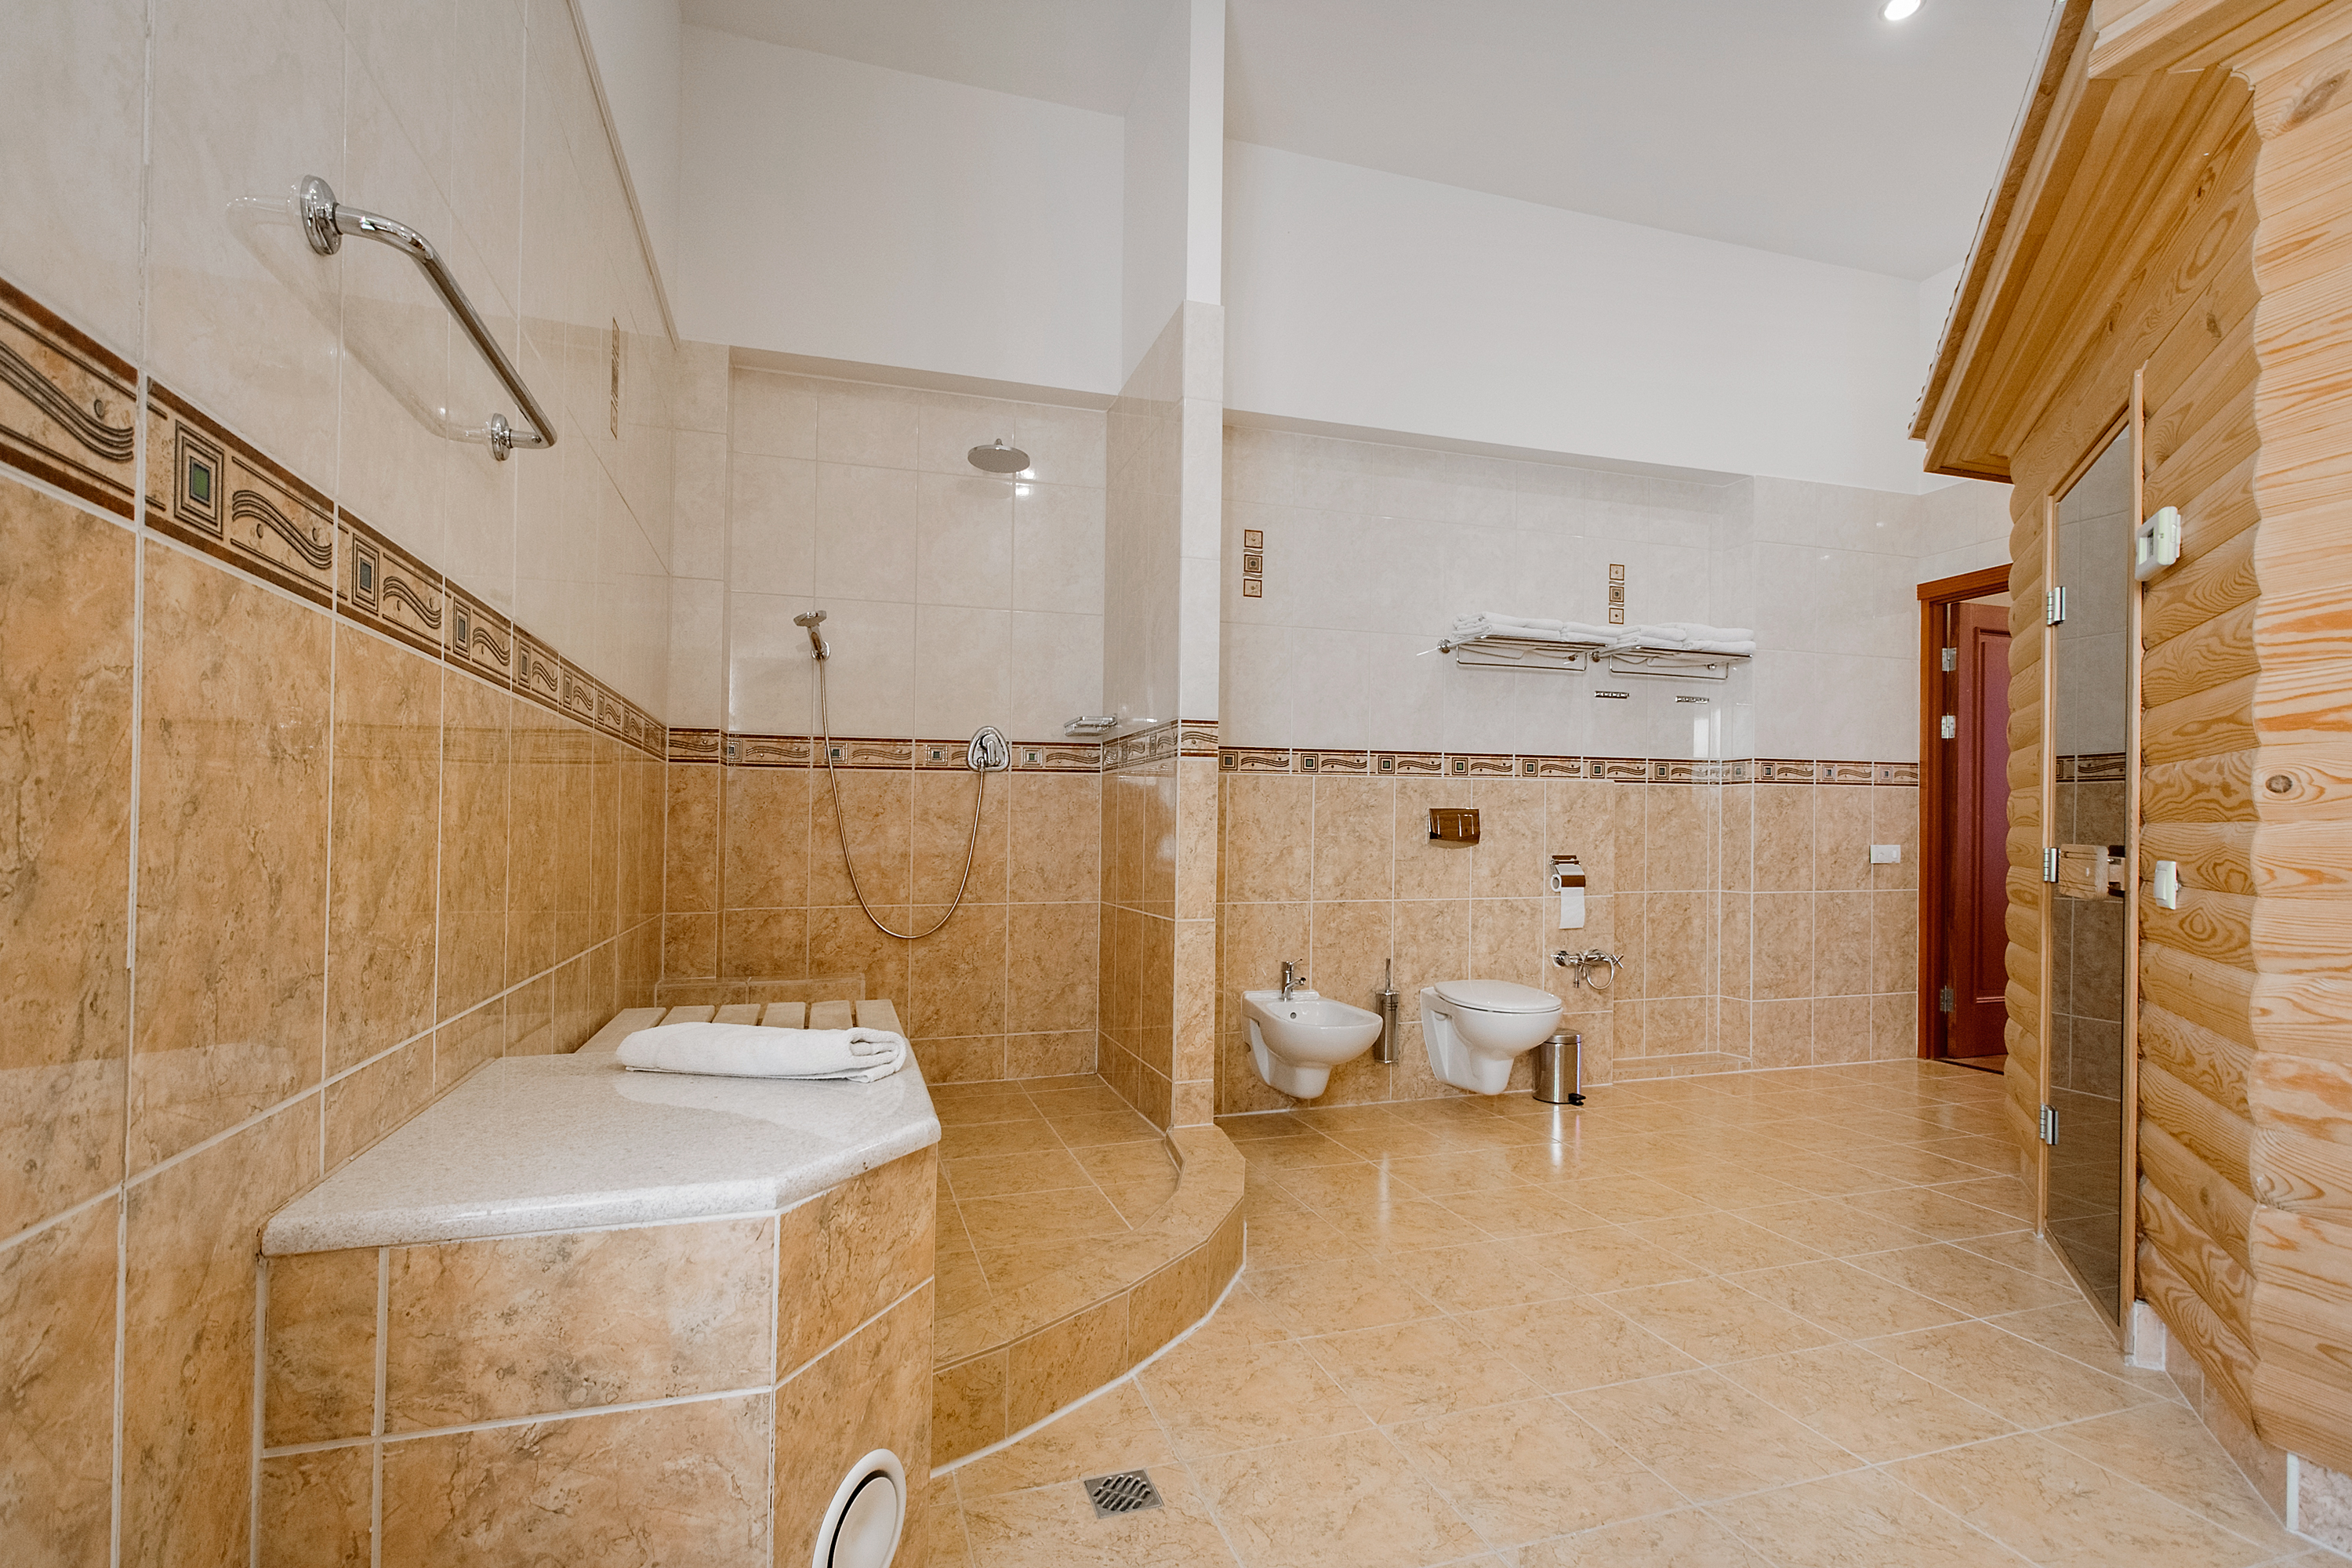 House for sale, Vecais kapteinis - Image 1